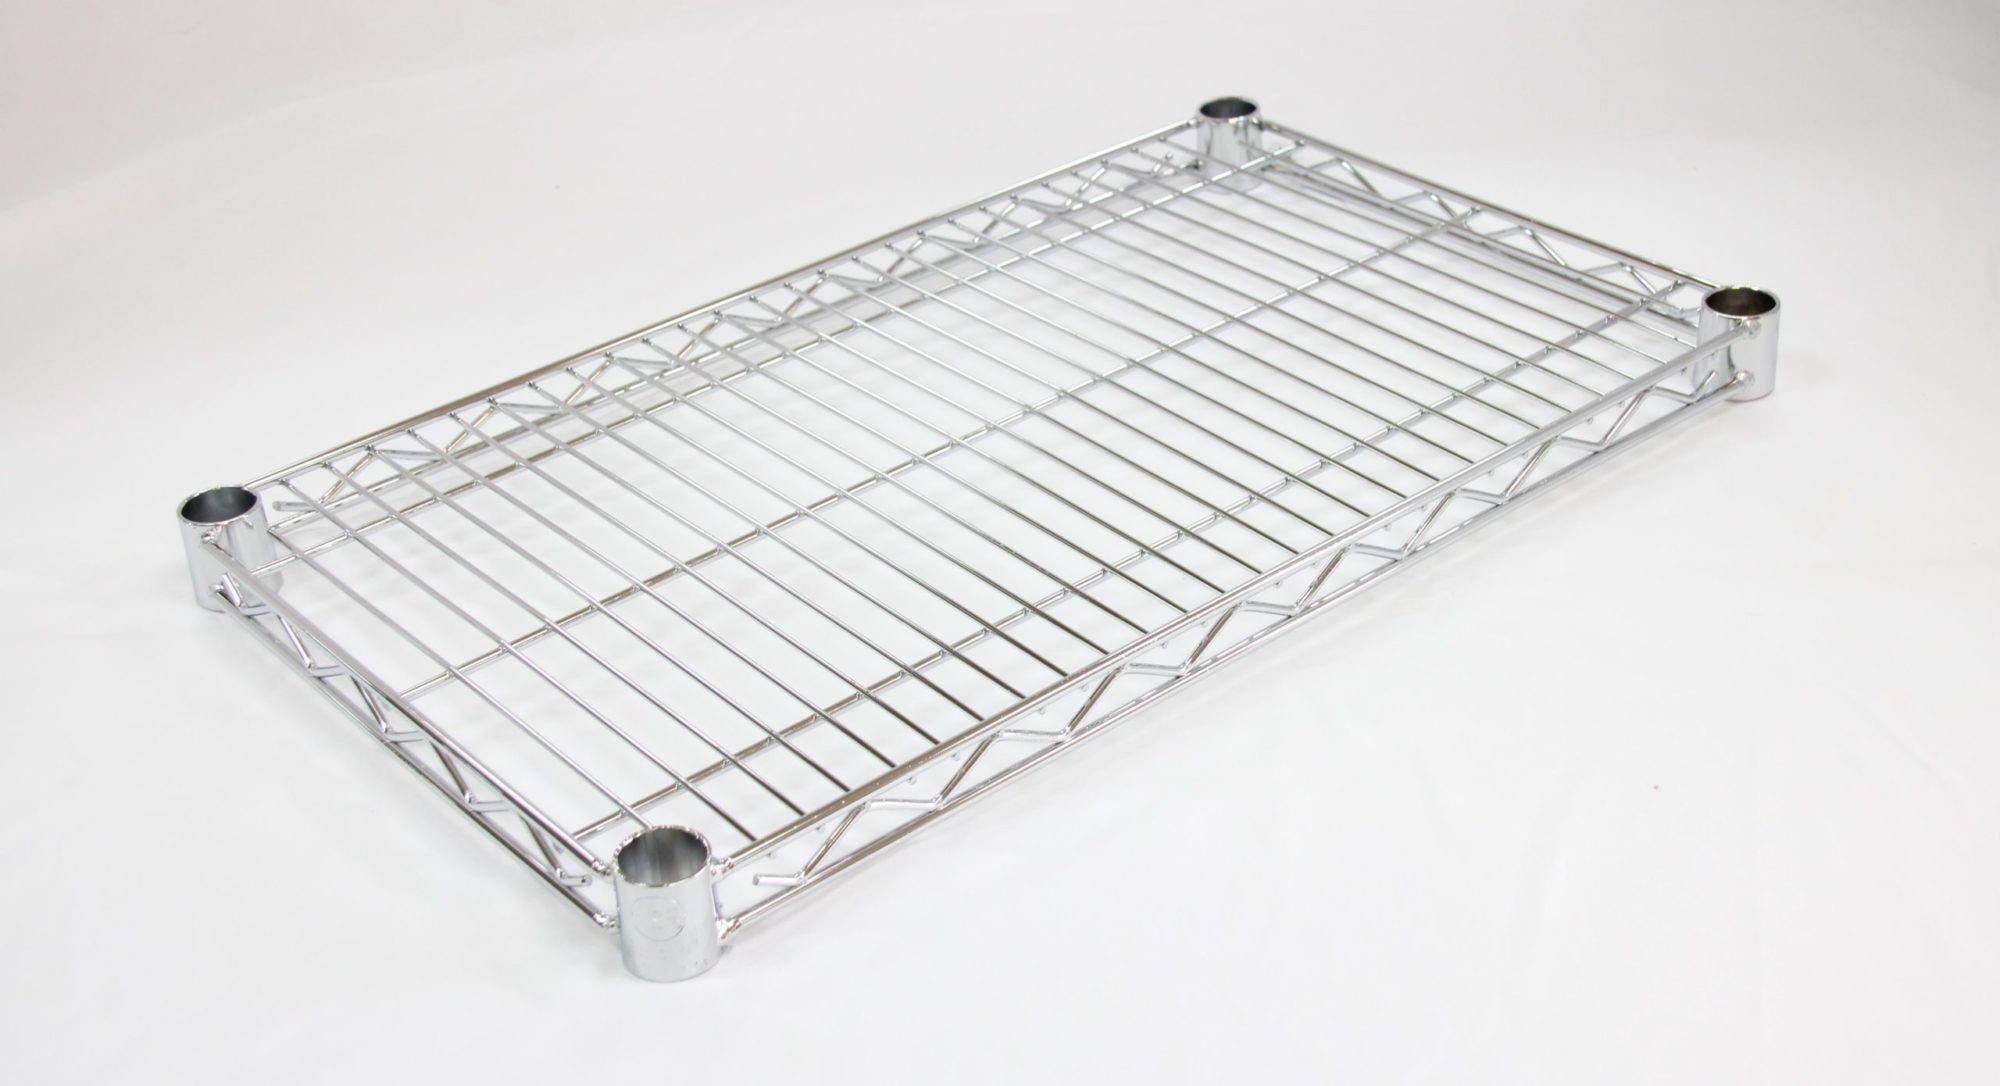 Omcan Wire Mesh Shelving 24" x 36" 20116 Chrome 2 Pack-S2436C